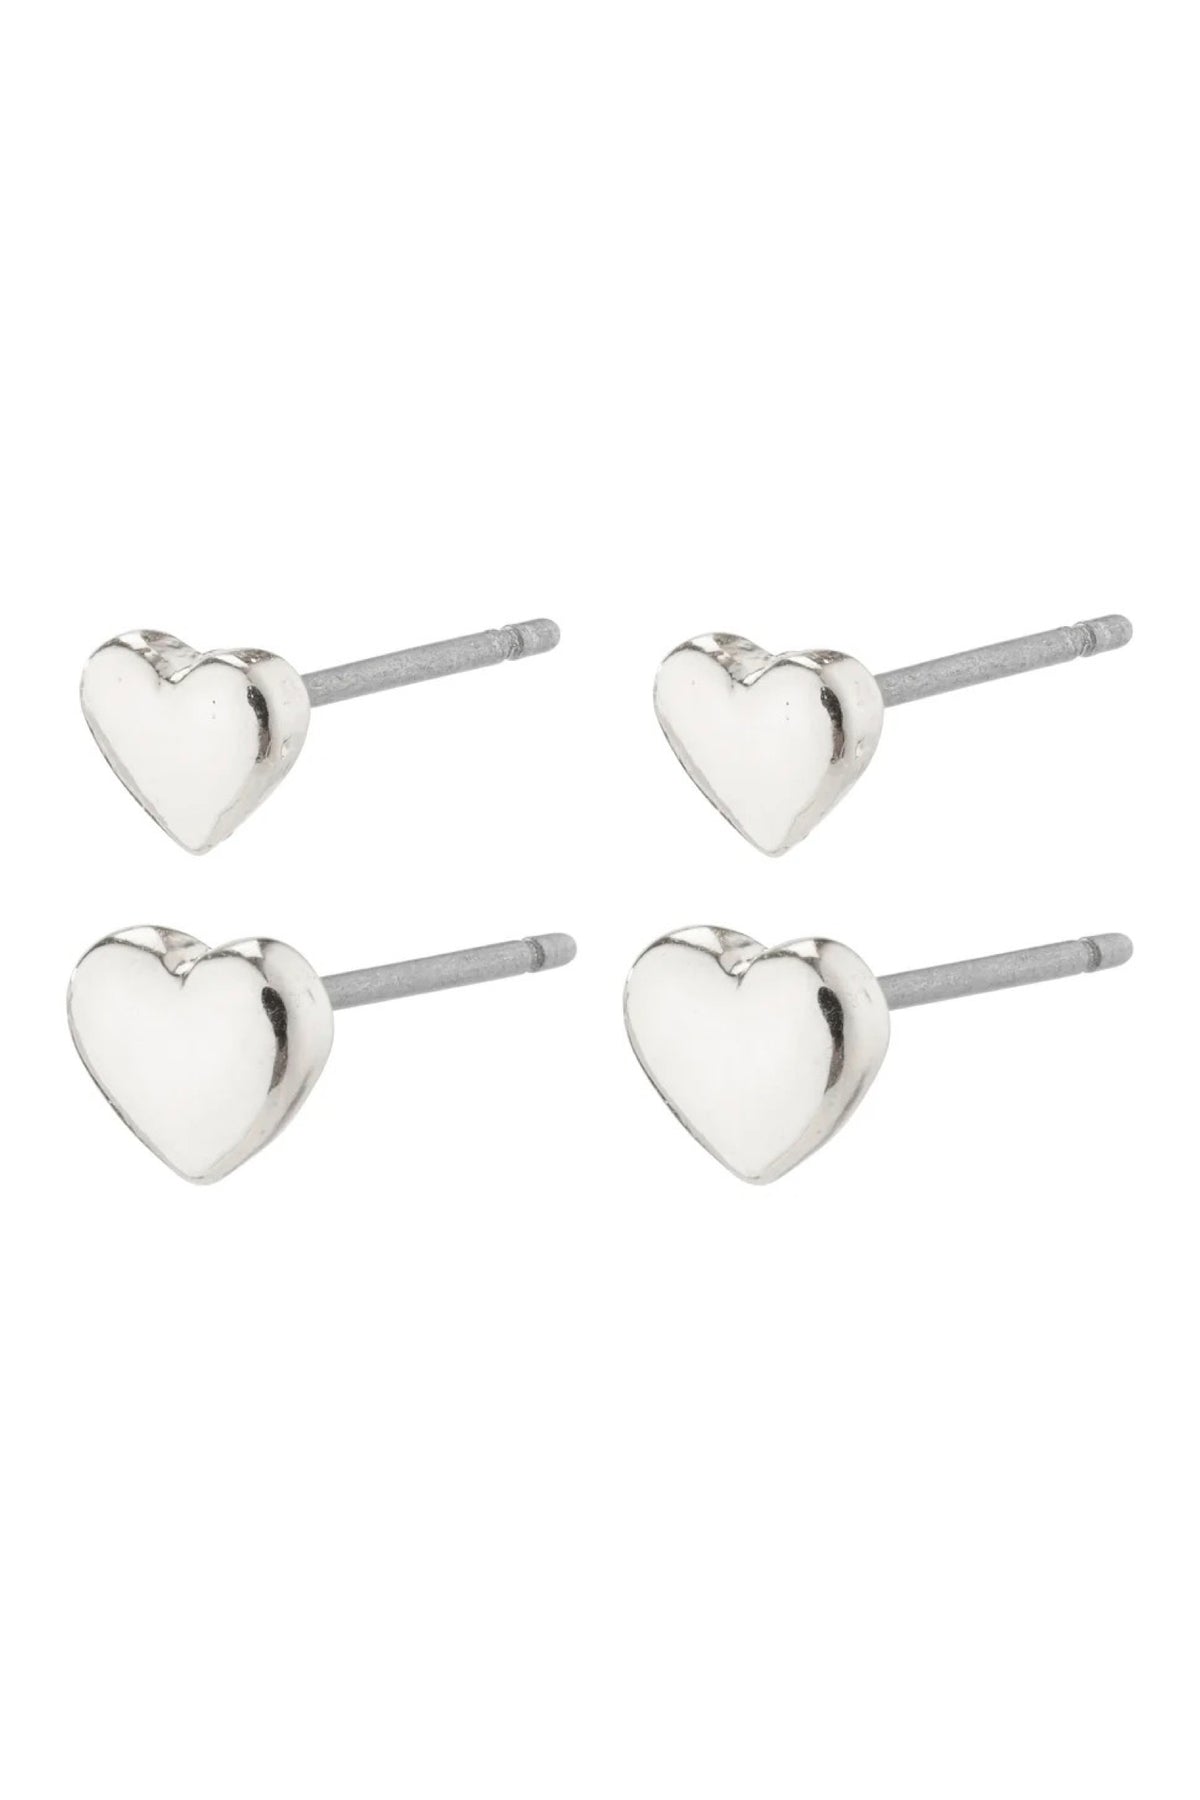 Afroditte Recycled Heart Earrings Silver Plated